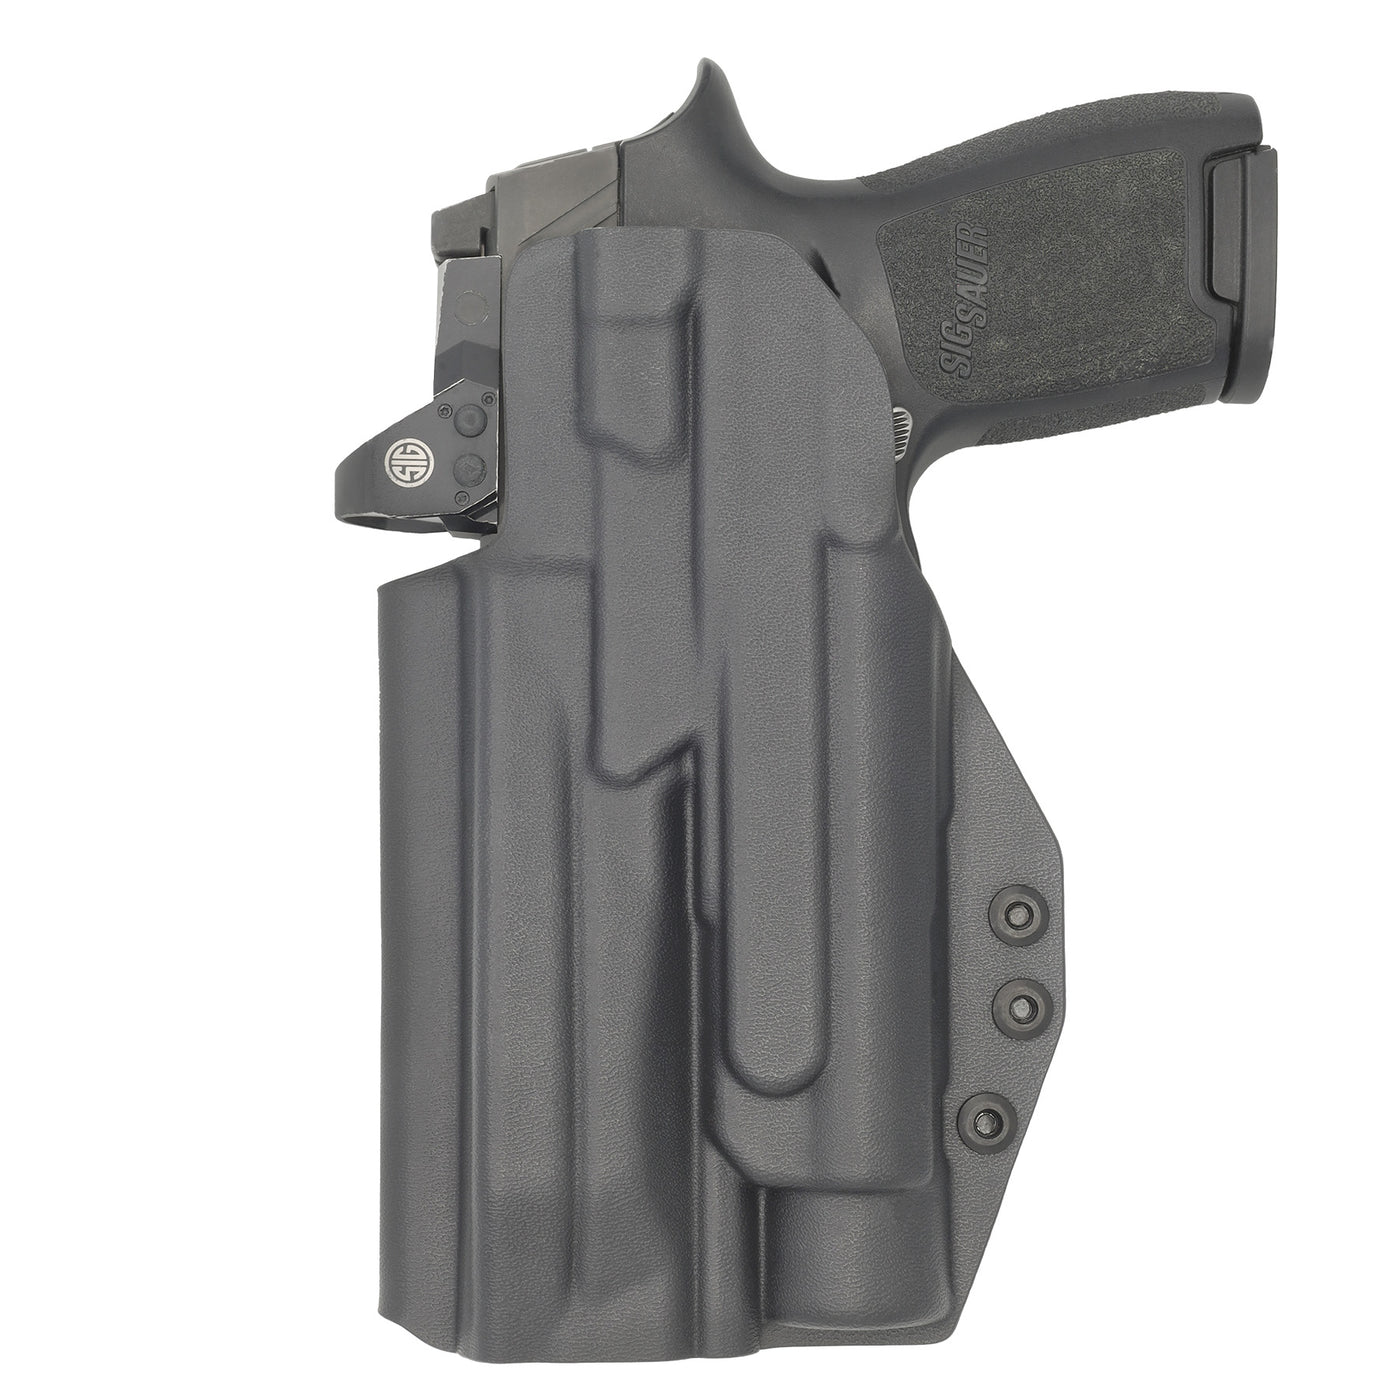 C&G Holsters Quickship IWB Tactical Masada Streamlight TLR1 in holstered position back view